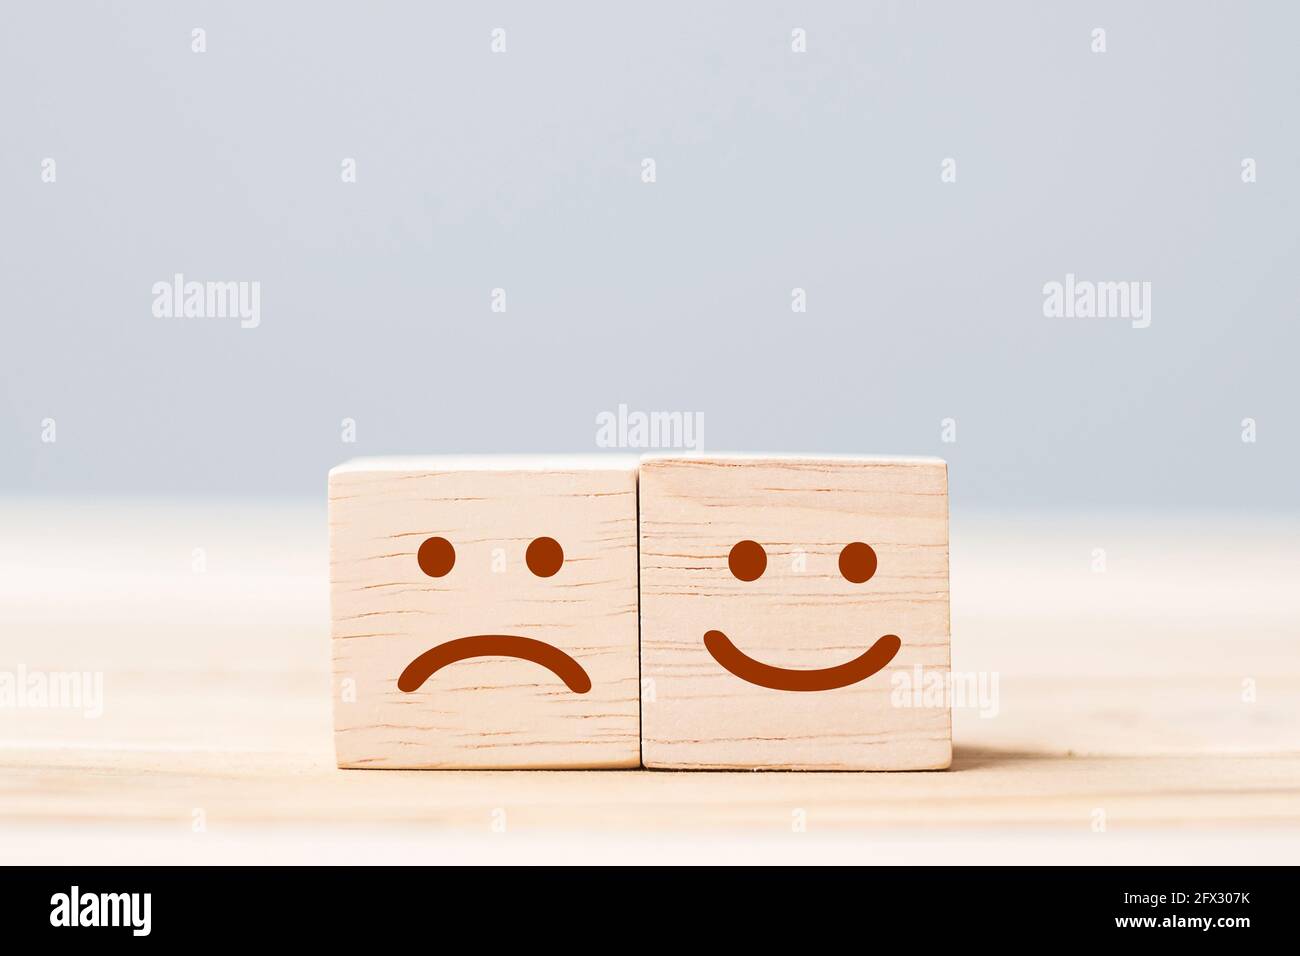 alamy stock photo review